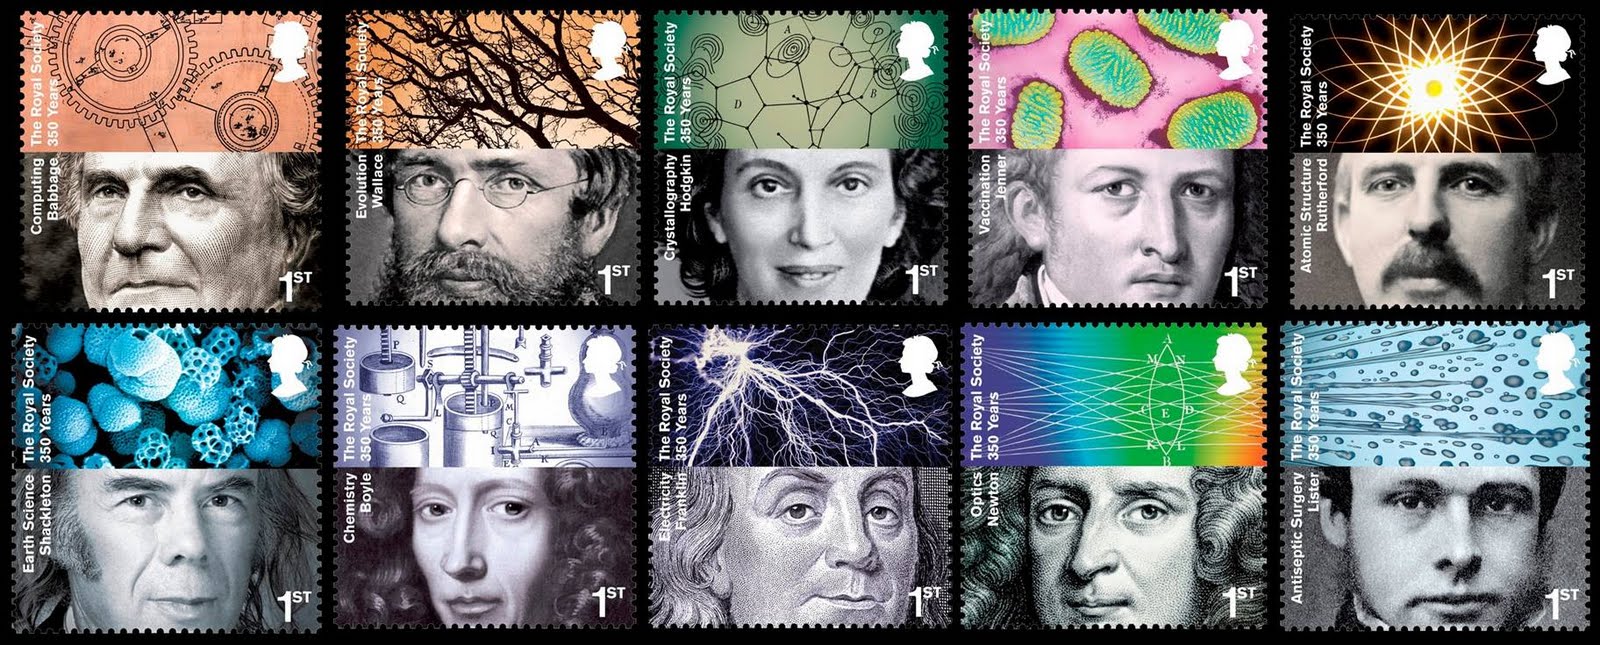 350 years of the Royal Society stamp set